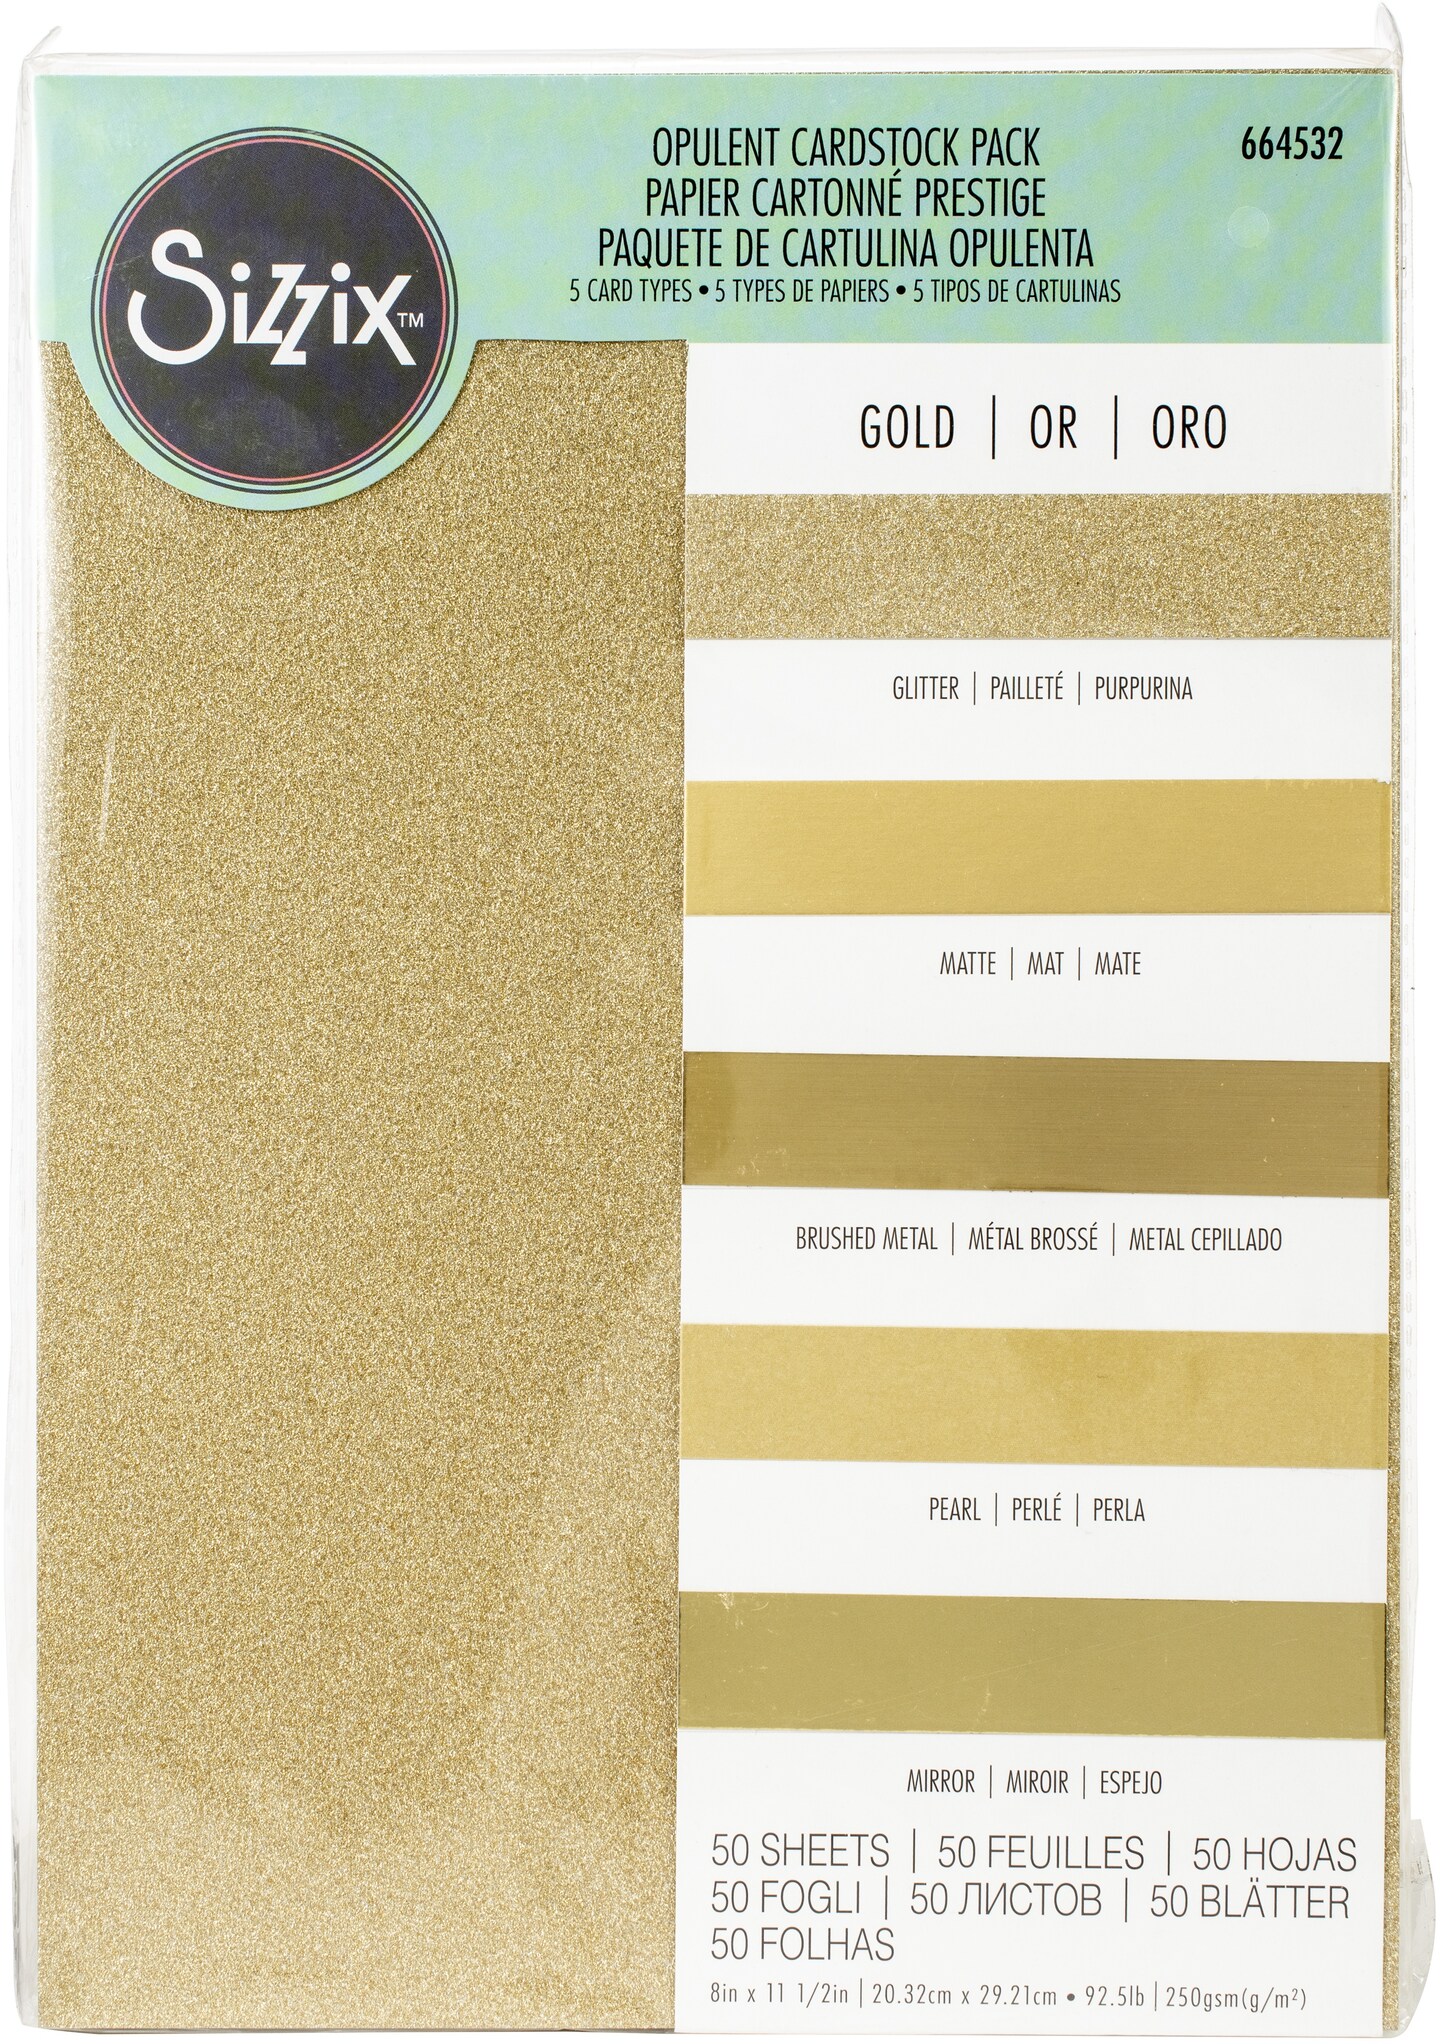 Sizzix Surfacez - The Opulent Cardstock Pack, Gold, 50PK